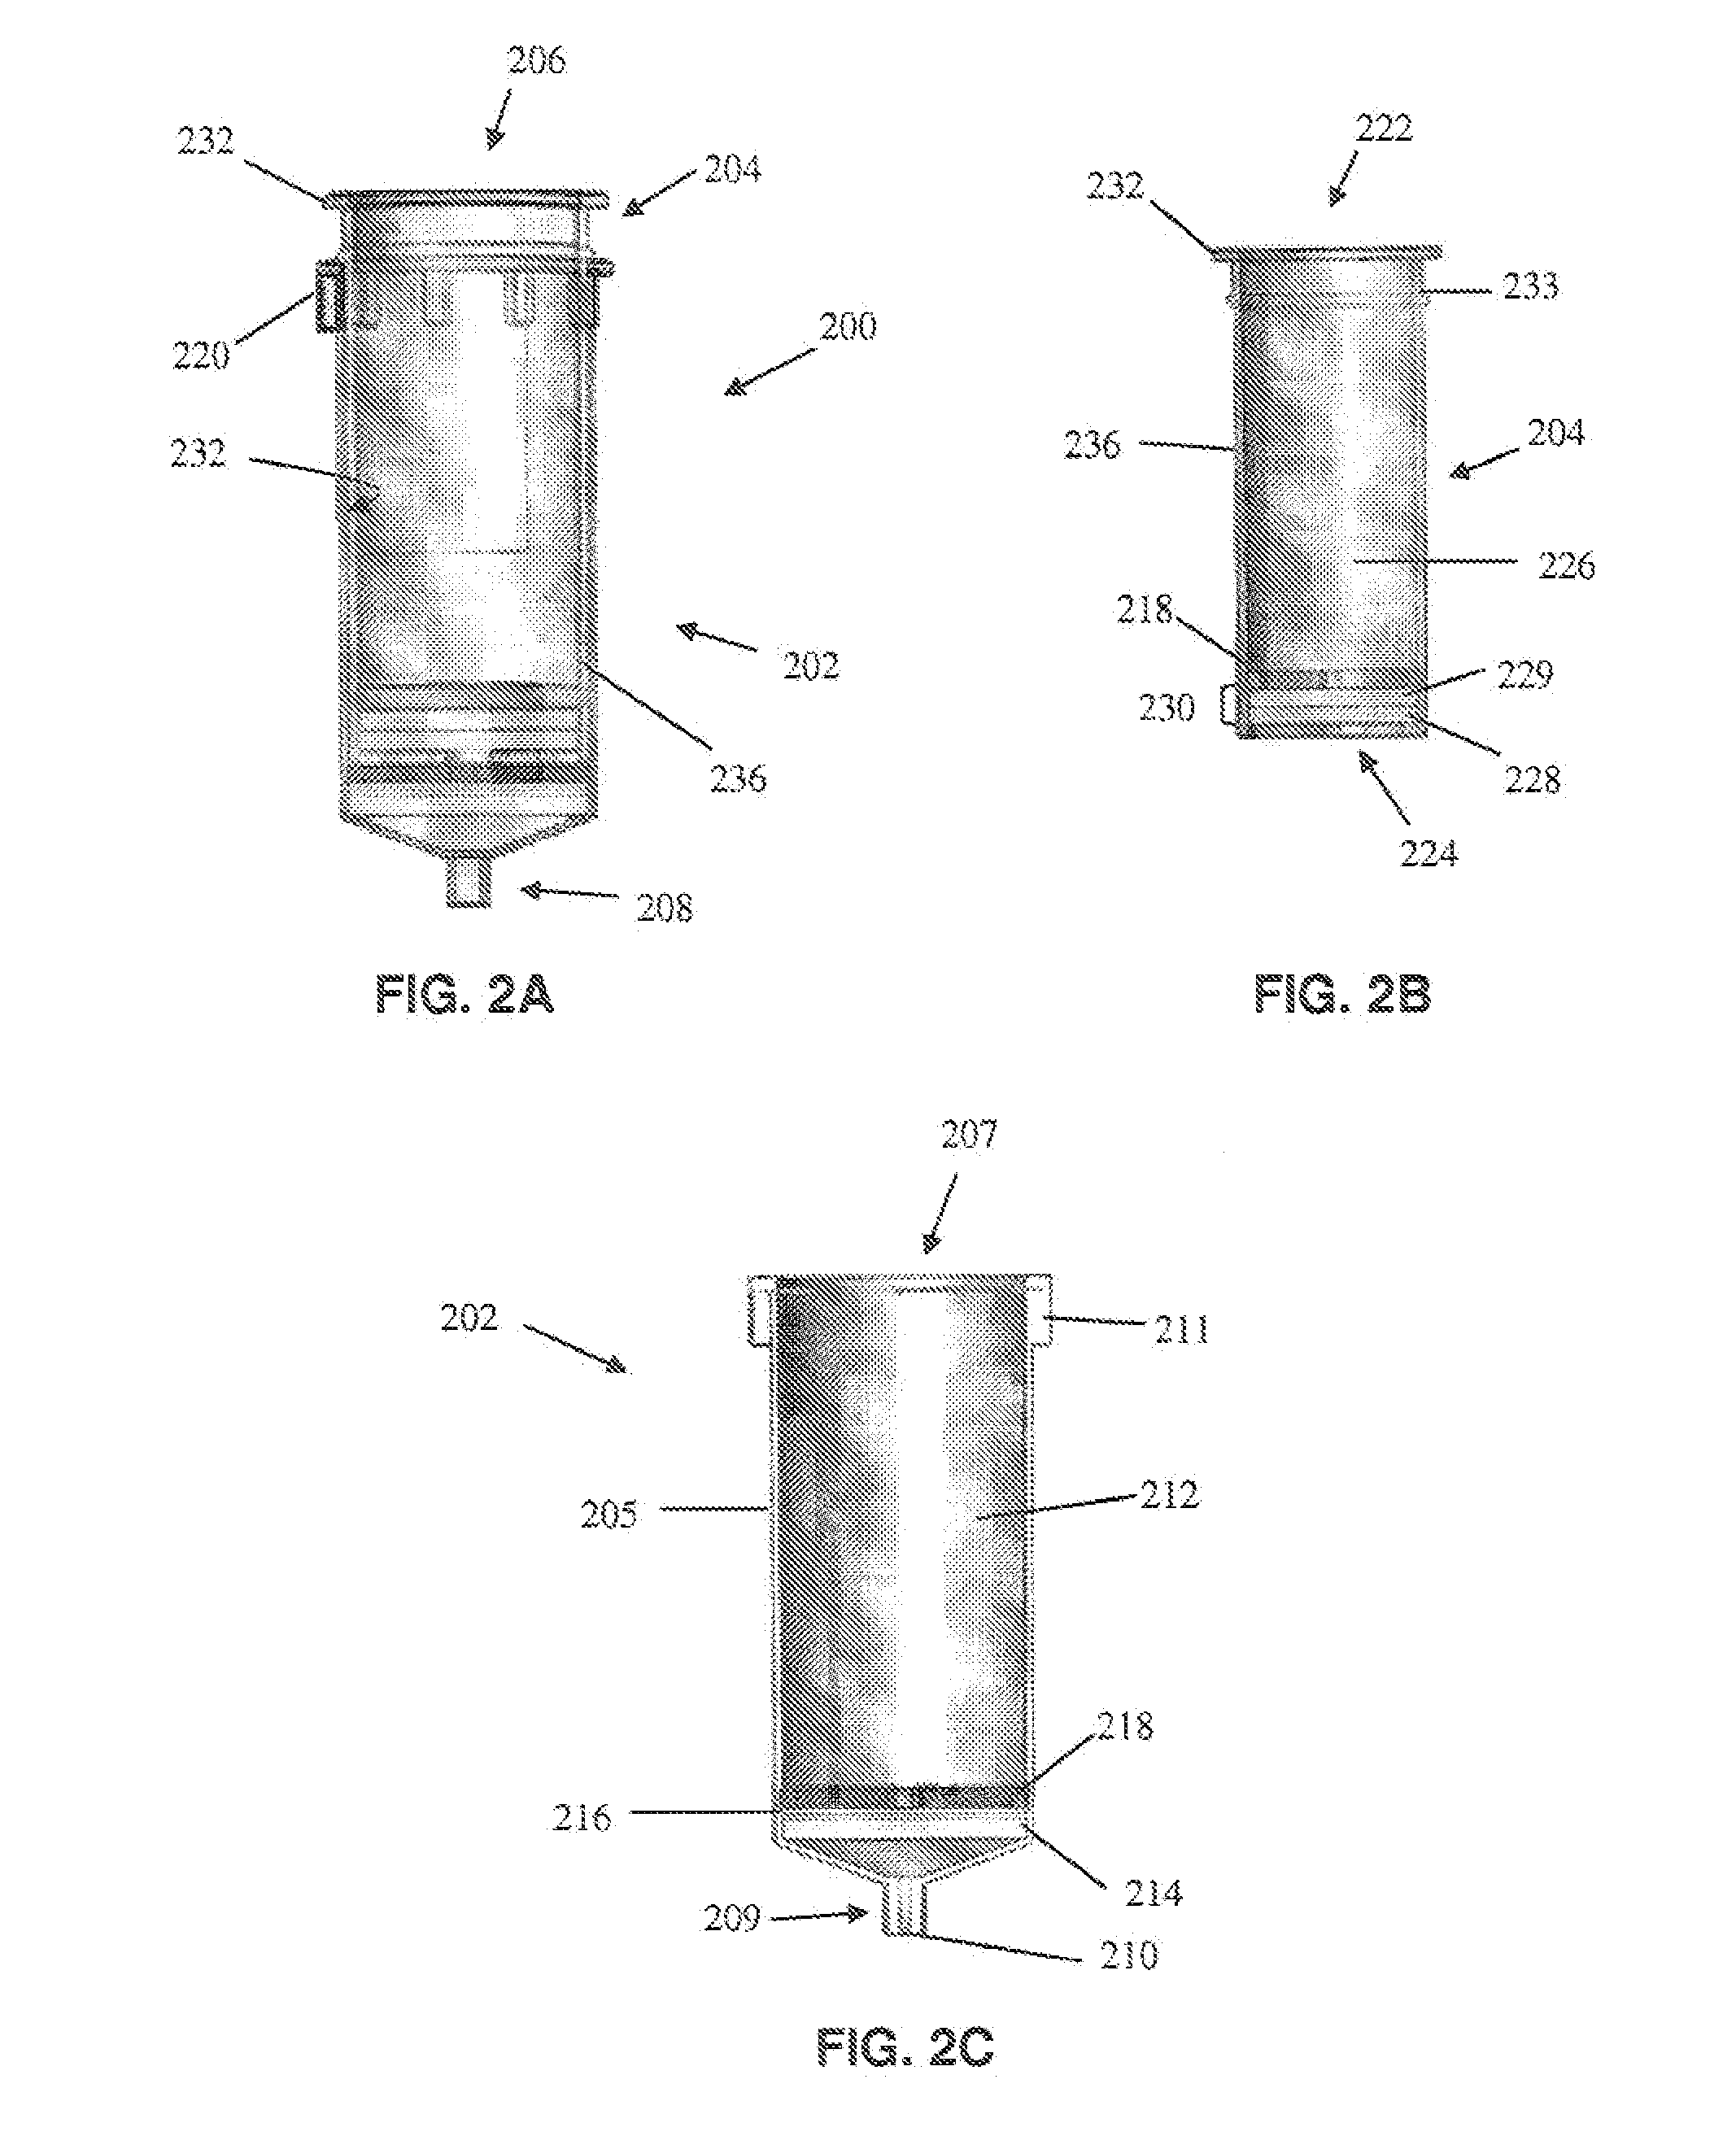 Nucleic acid purification apparatus and method